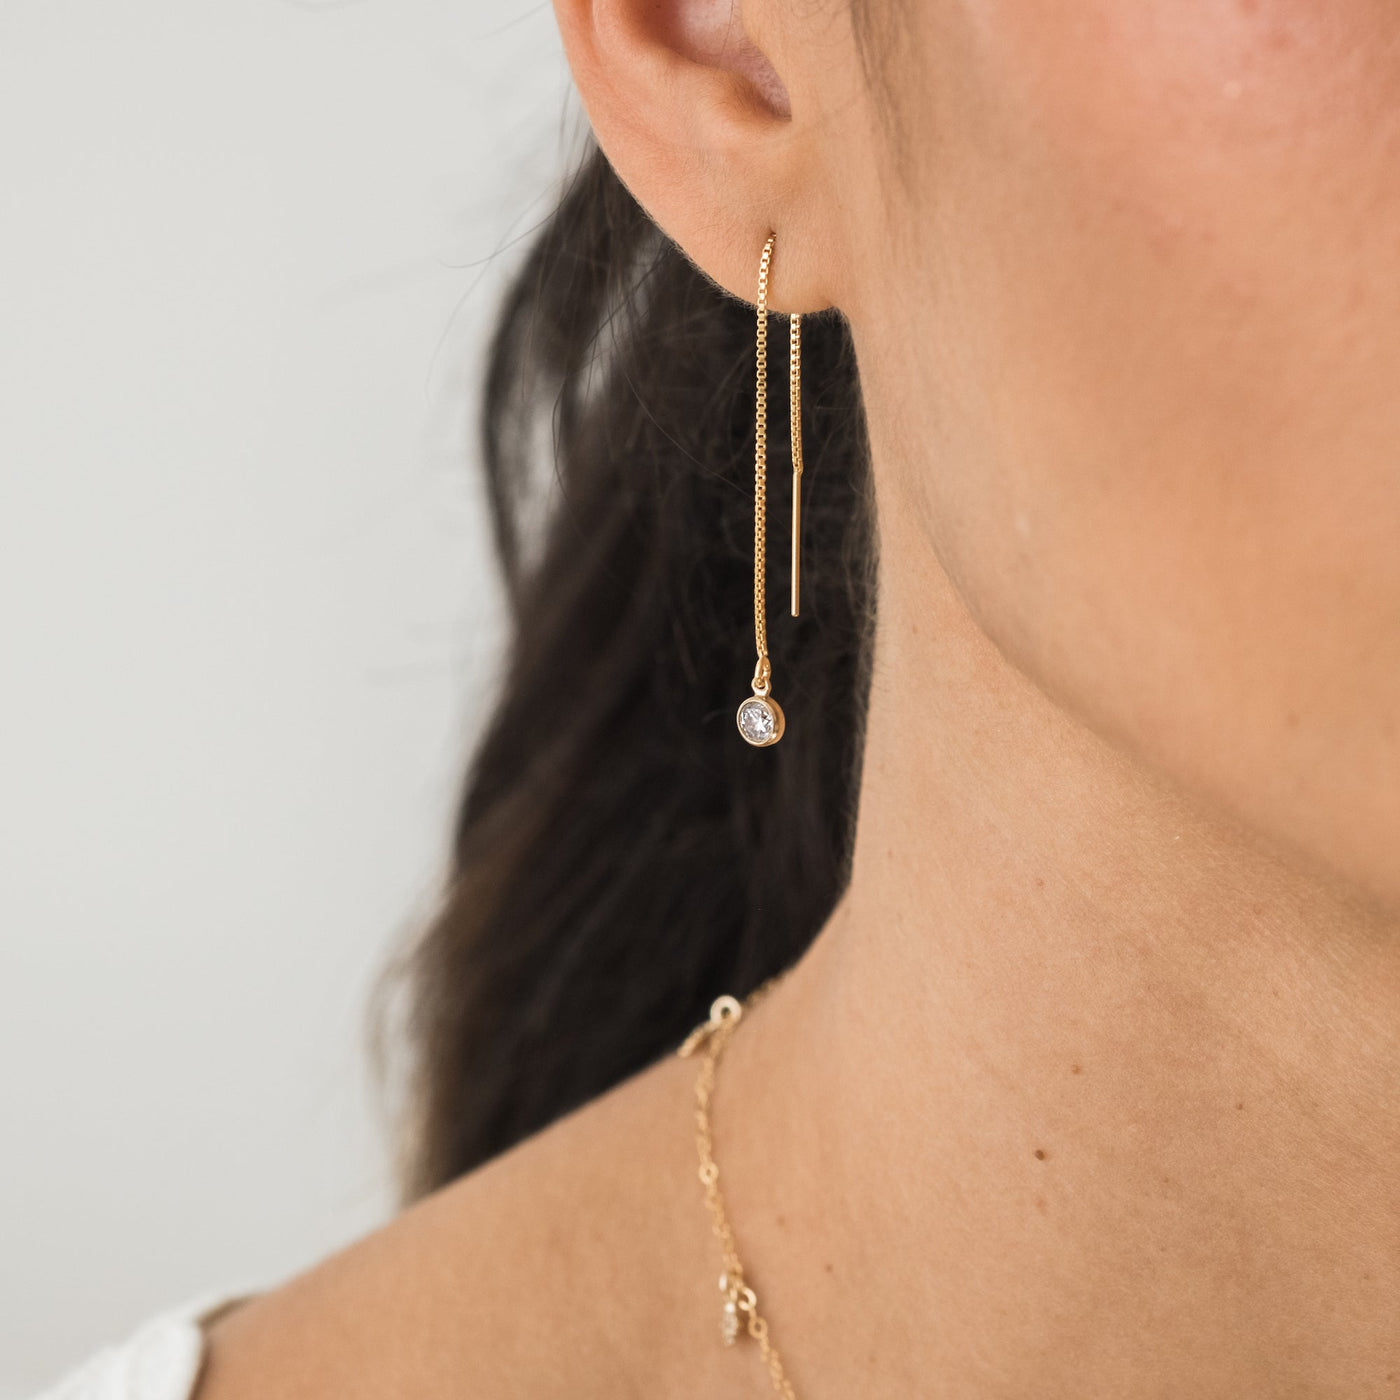 Tiny Solitaire Threader Earrings | Simple & Dainty Jewelry